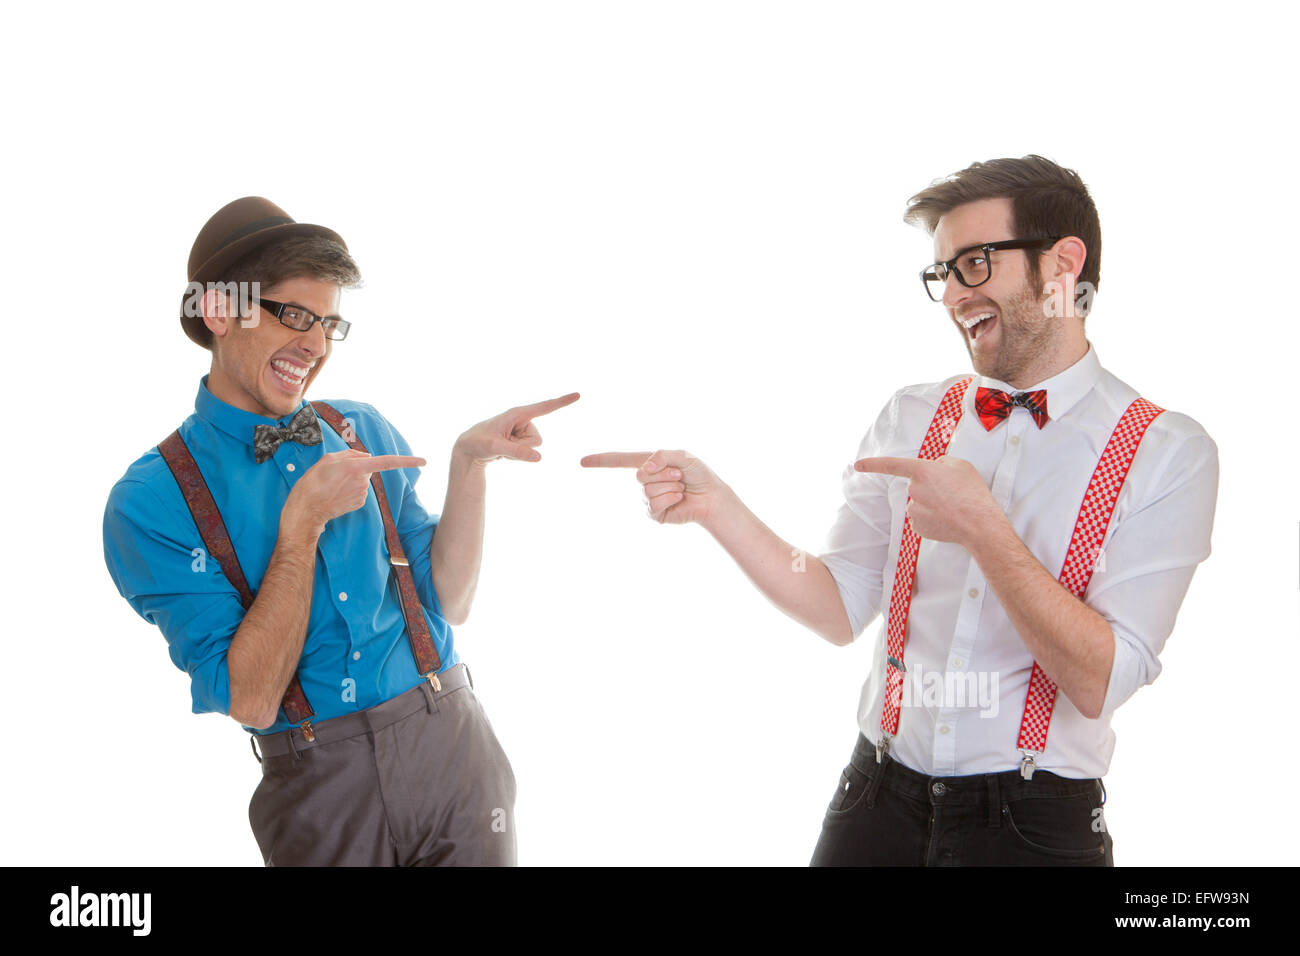 quirky humorous, funny business men pointing Stock Photo